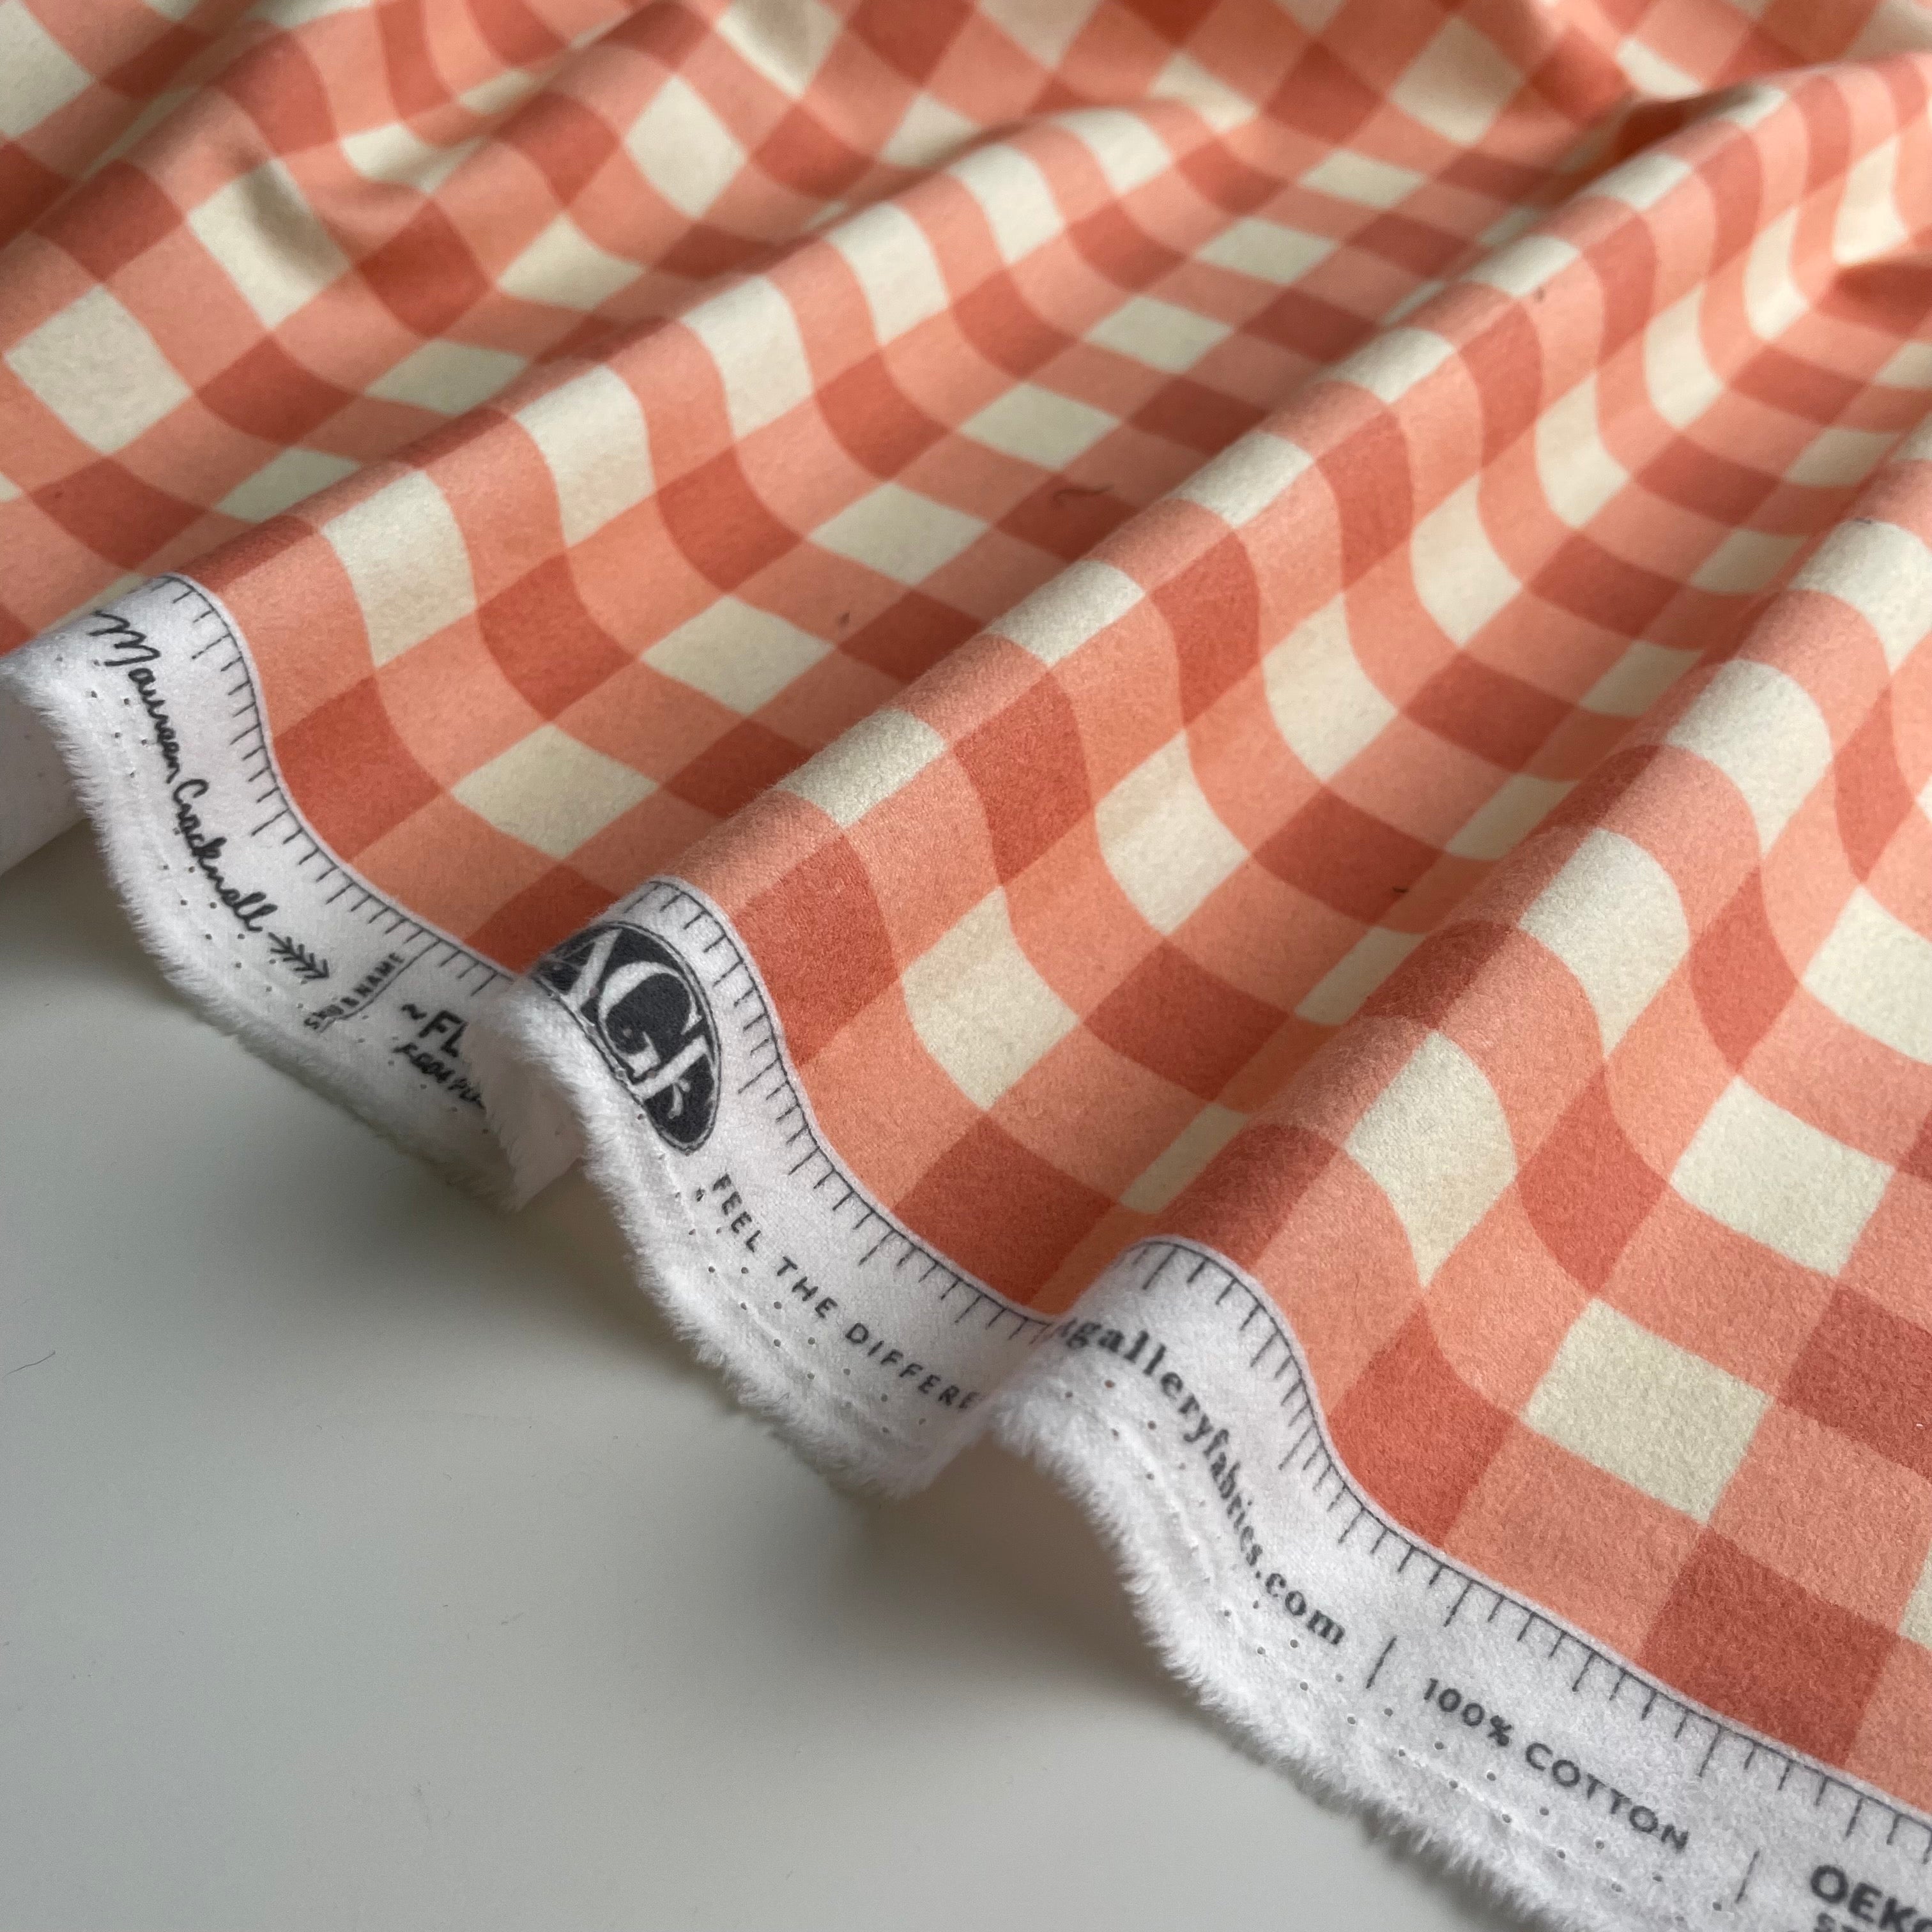 REMNANT 2.63 metres - Art Gallery Fabrics - Plaid Of My Dreams Blush Brushed Cotton Flannel